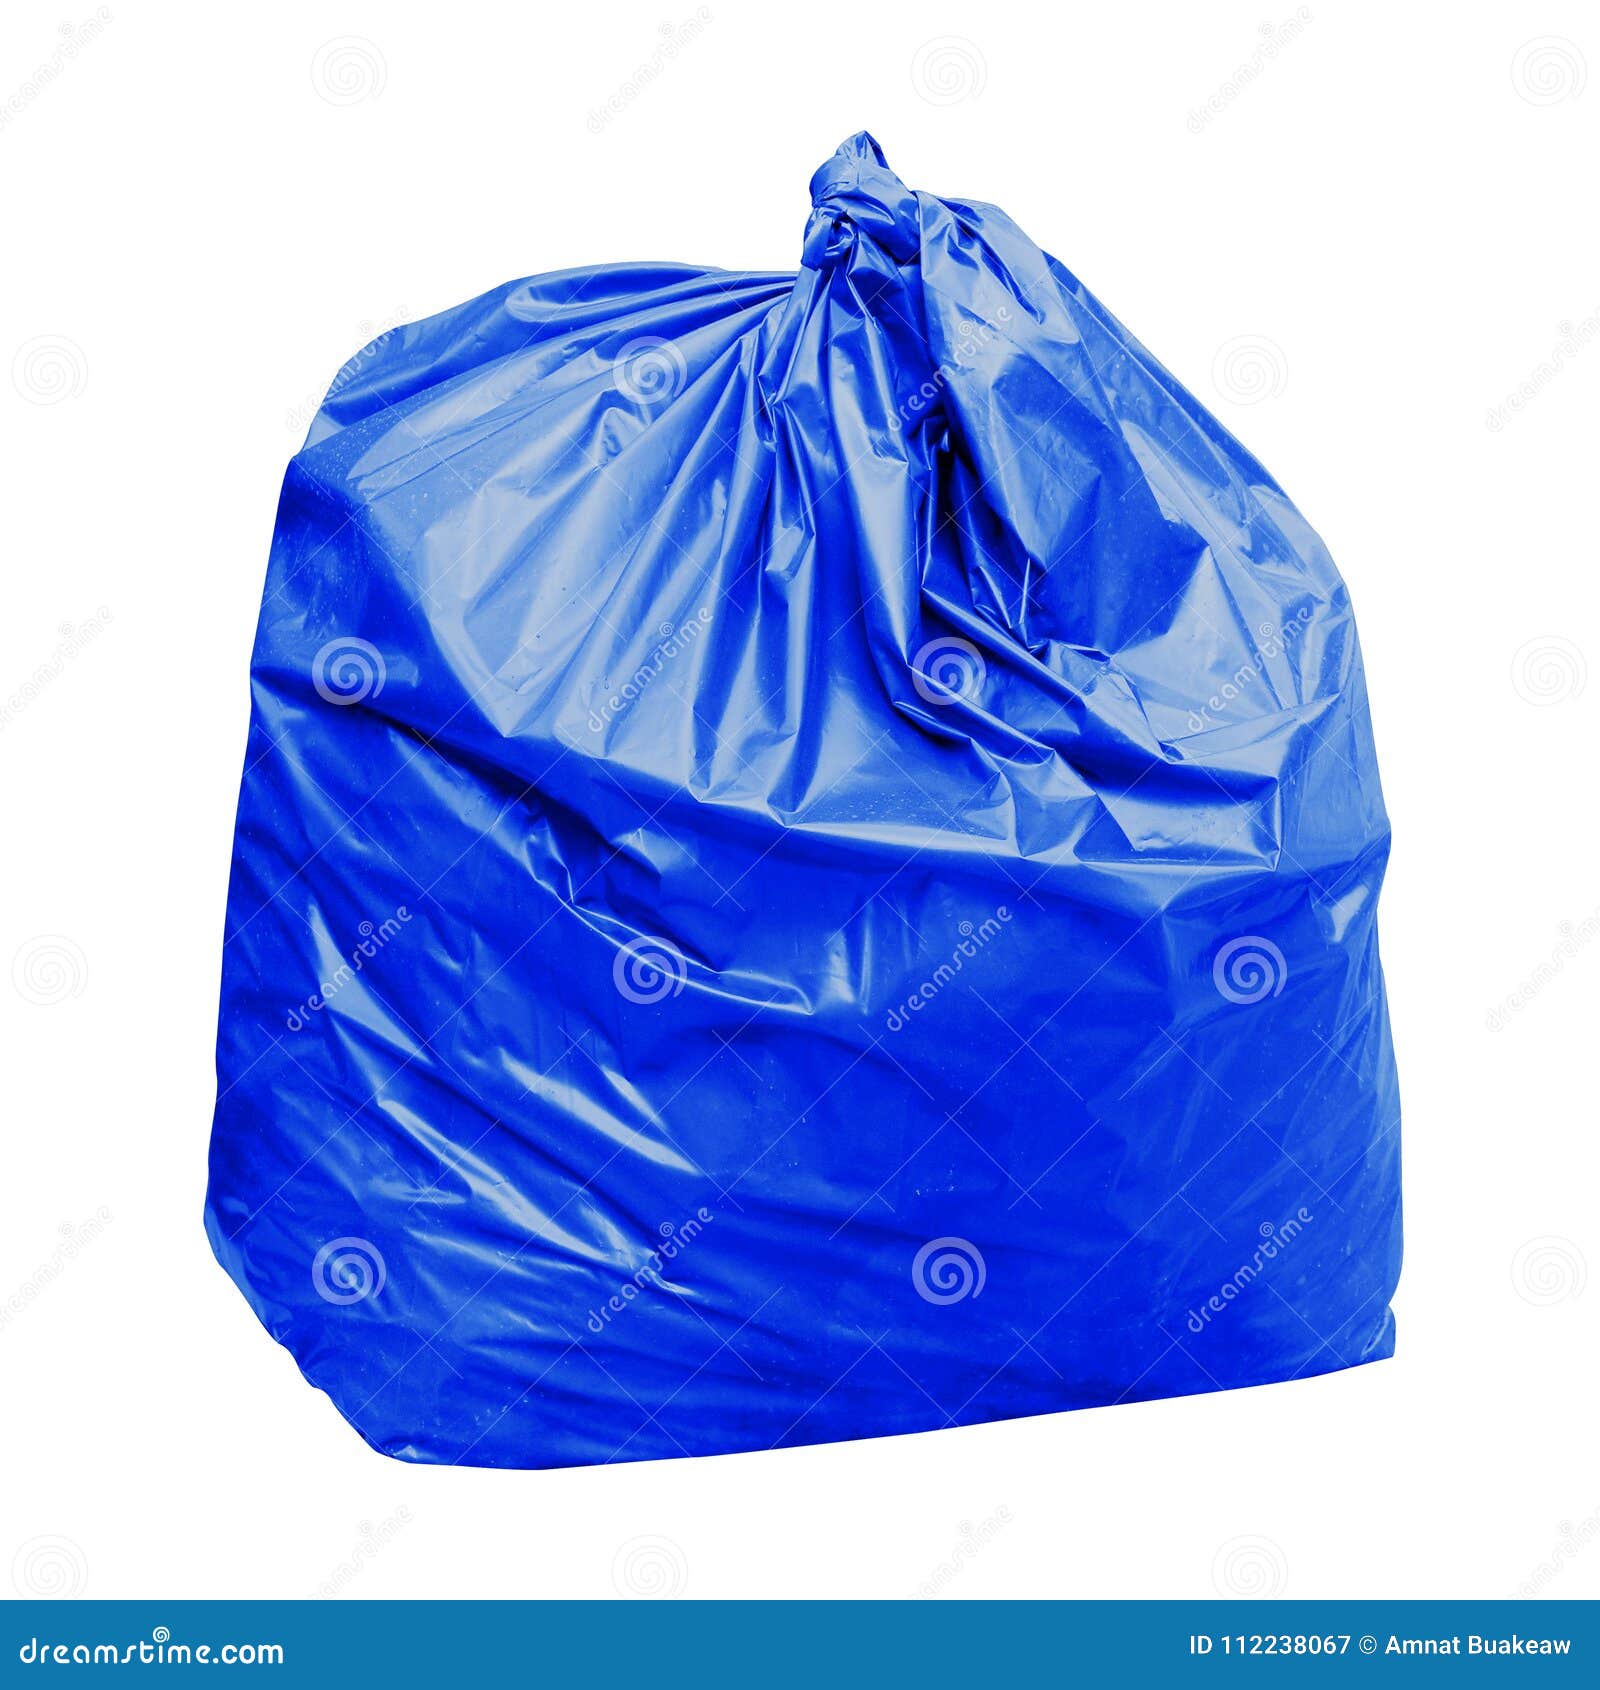 https://thumbs.dreamstime.com/z/garbage-blue-bag-concept-color-bags-general-waste-isolated-white-background-112238067.jpg